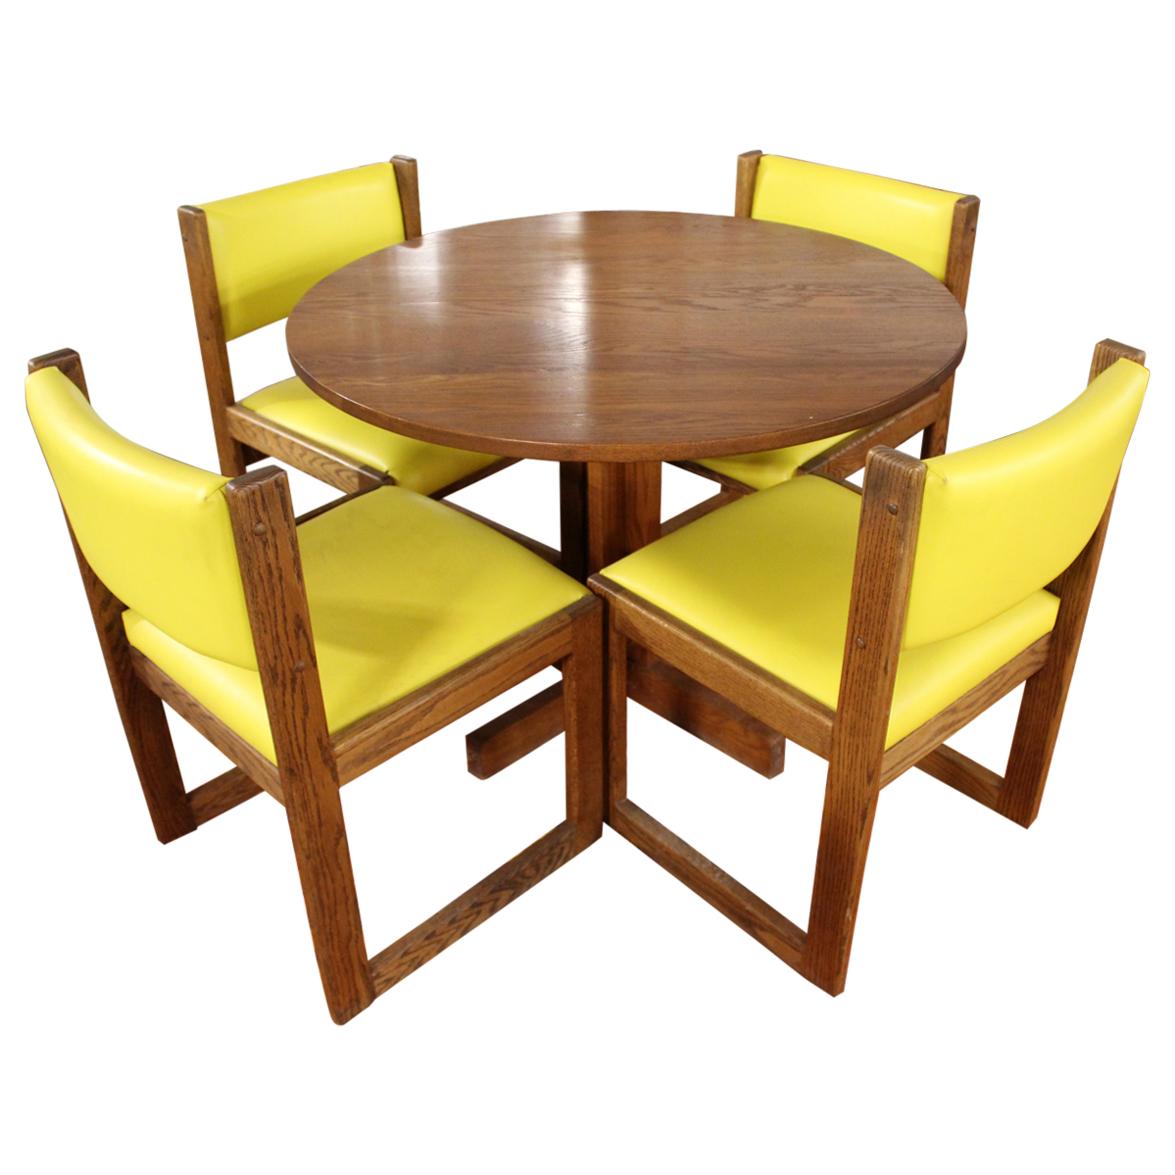 Mid-Century Modern Round Oval Expandable Dinette Dining Table 4 Chairs, 1950s